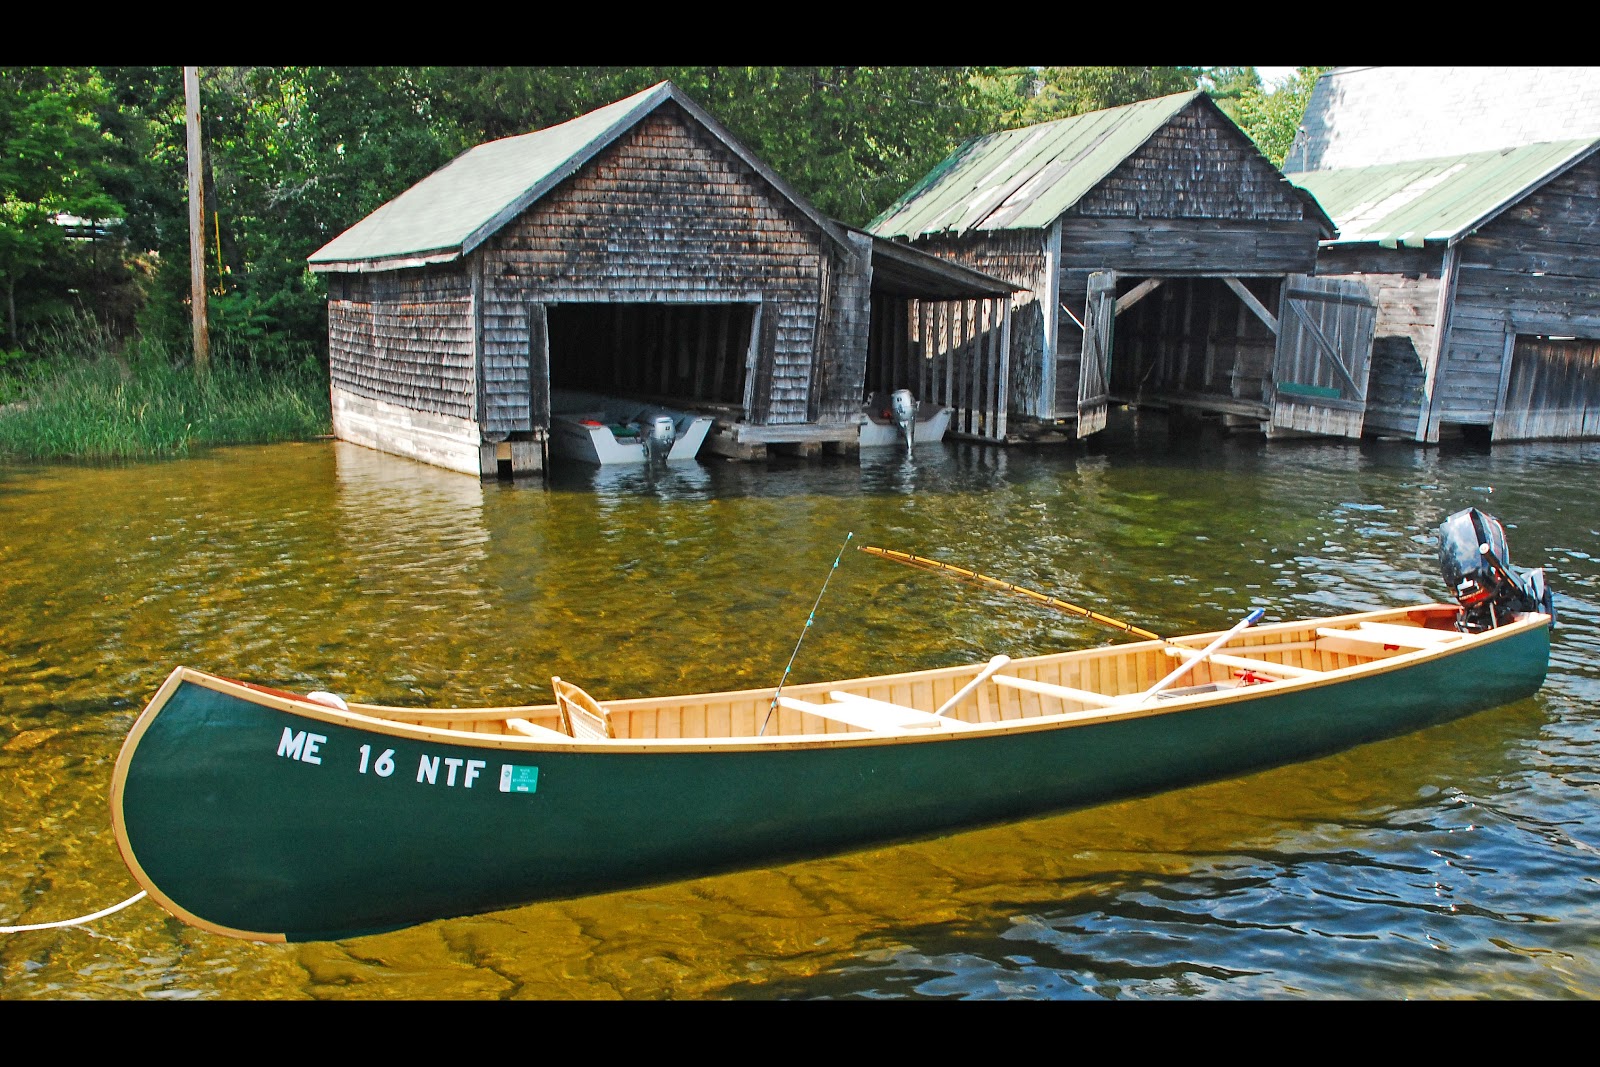 Holy boat: Archive Building a grand laker canoe